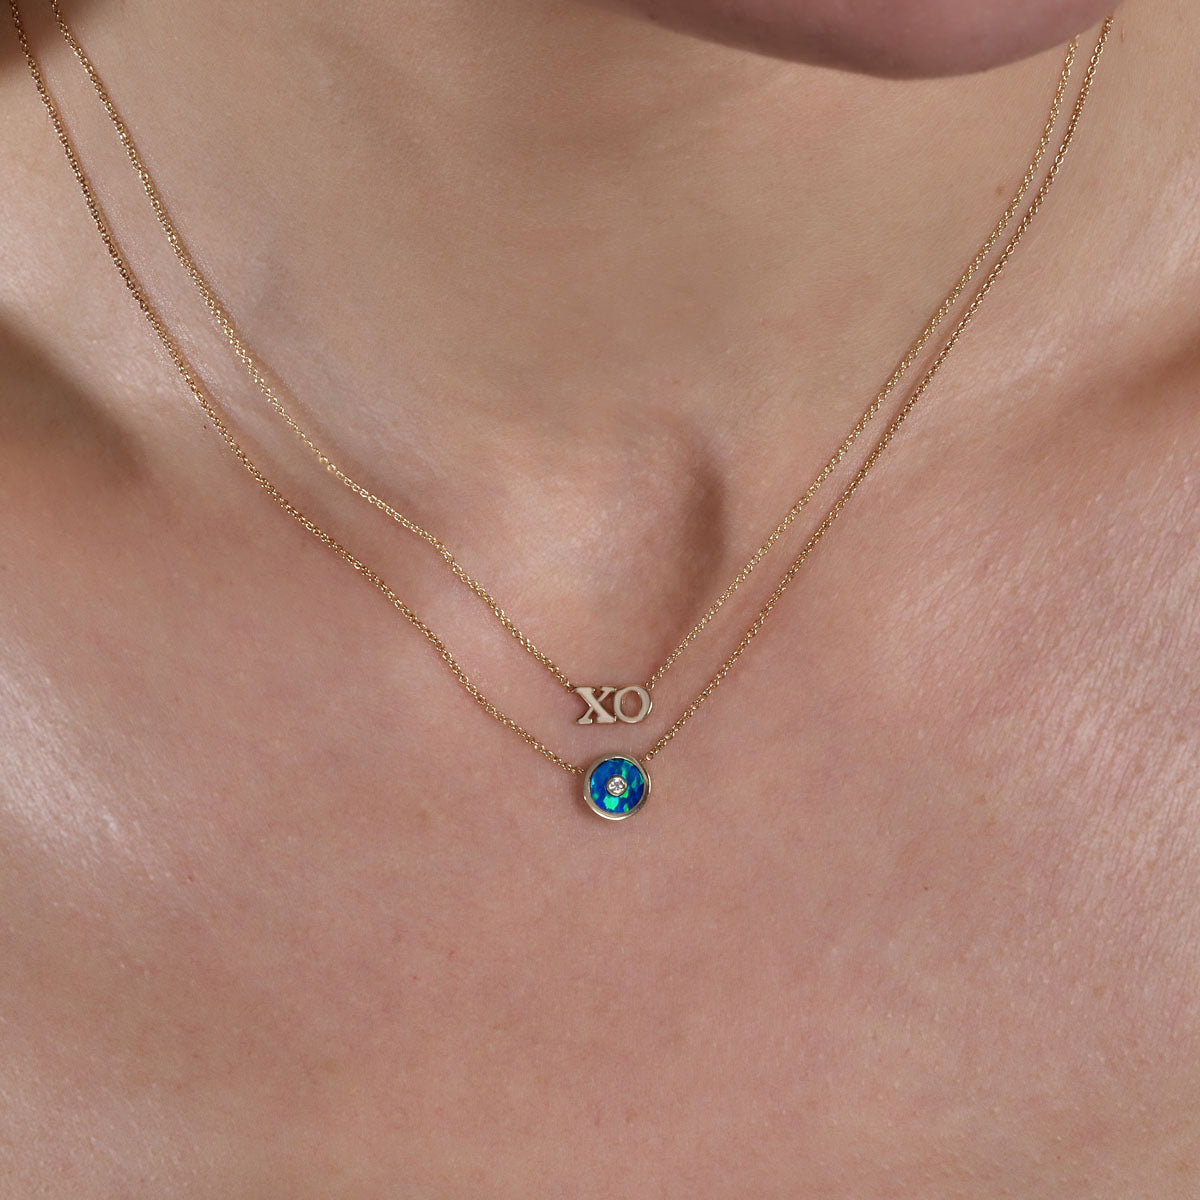 gold xo necklace and gold turquoise blue round necklace on neck